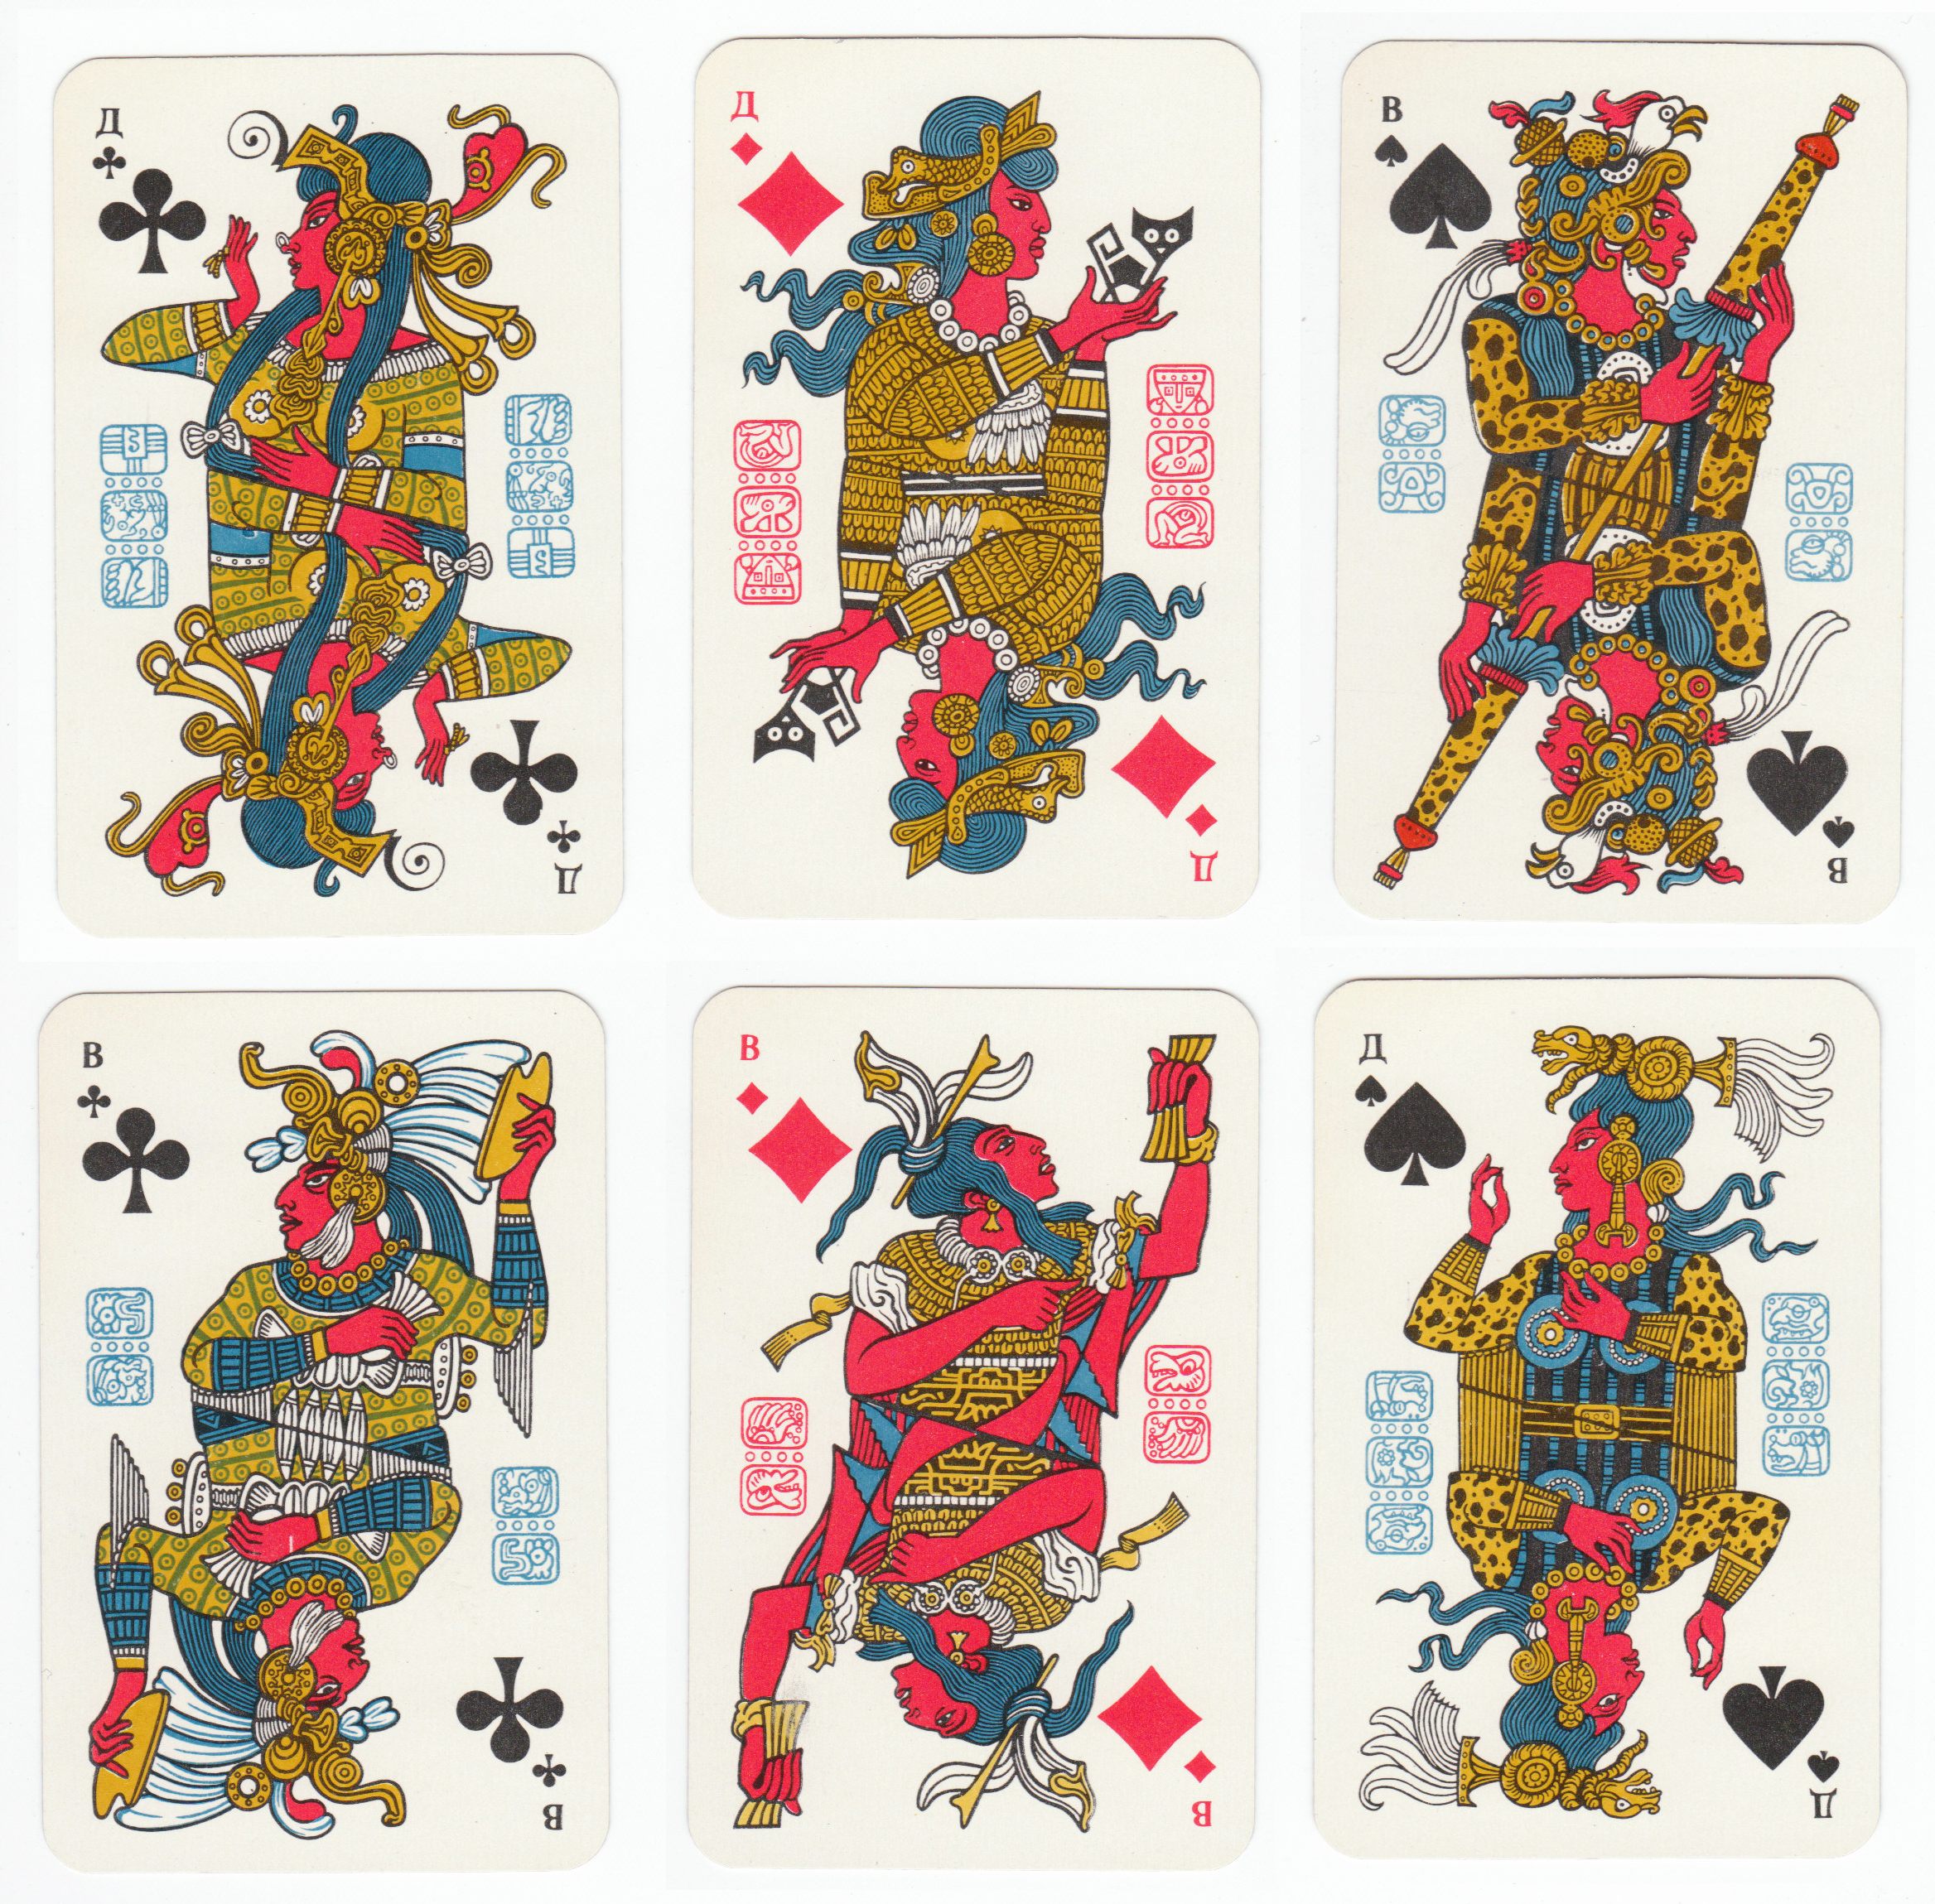 Playing Cards Around the World and Through the Ages - Atlas Obscura